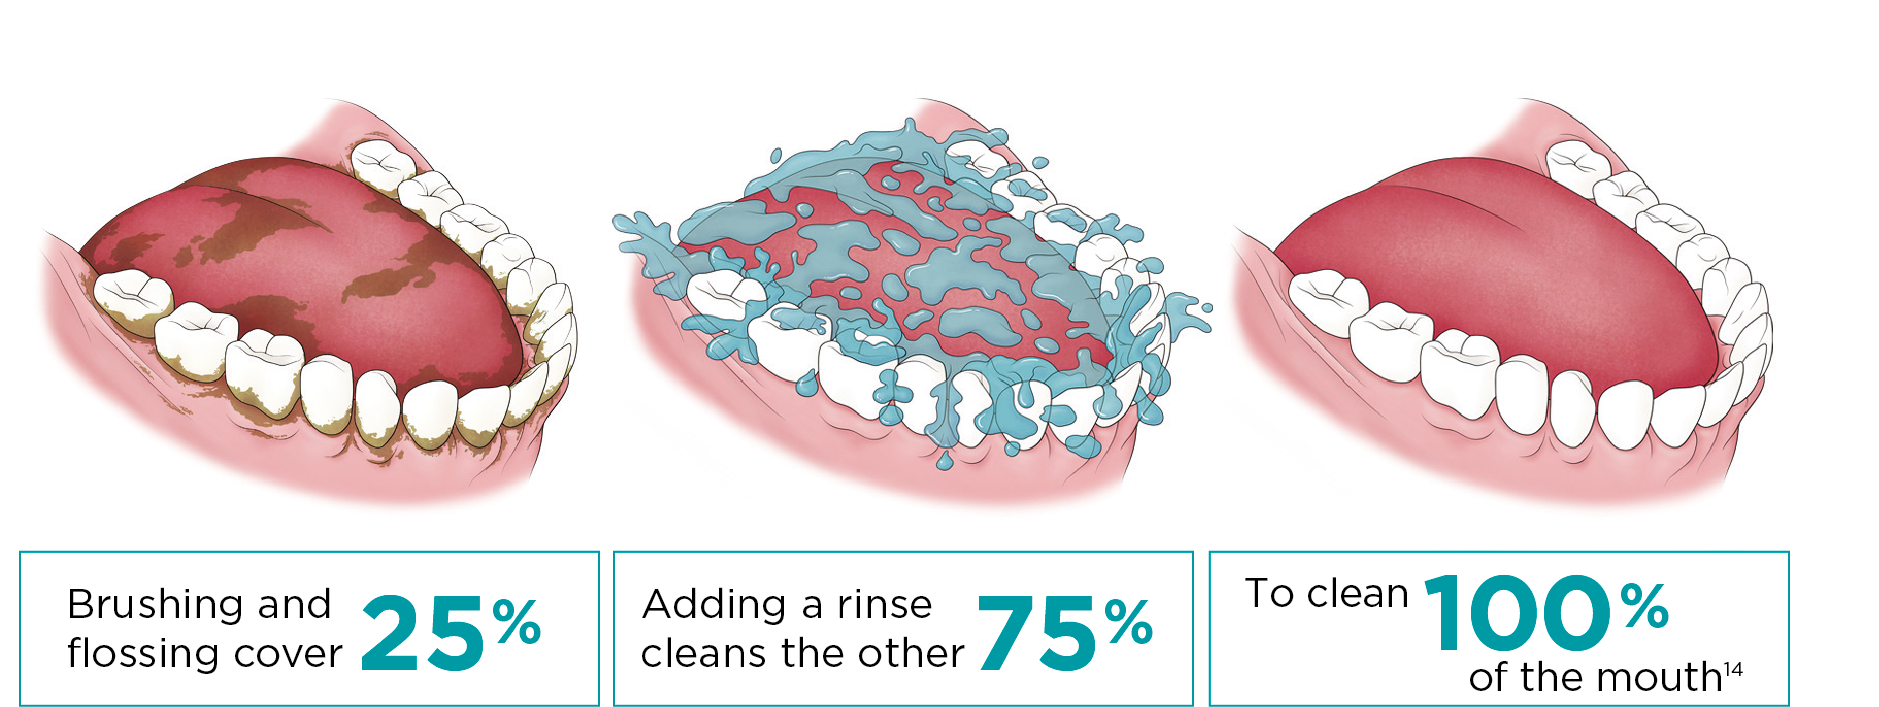 Brushing and flossing cover 25% Adding a rinse cleans 75% for a 100% whole mouth clean